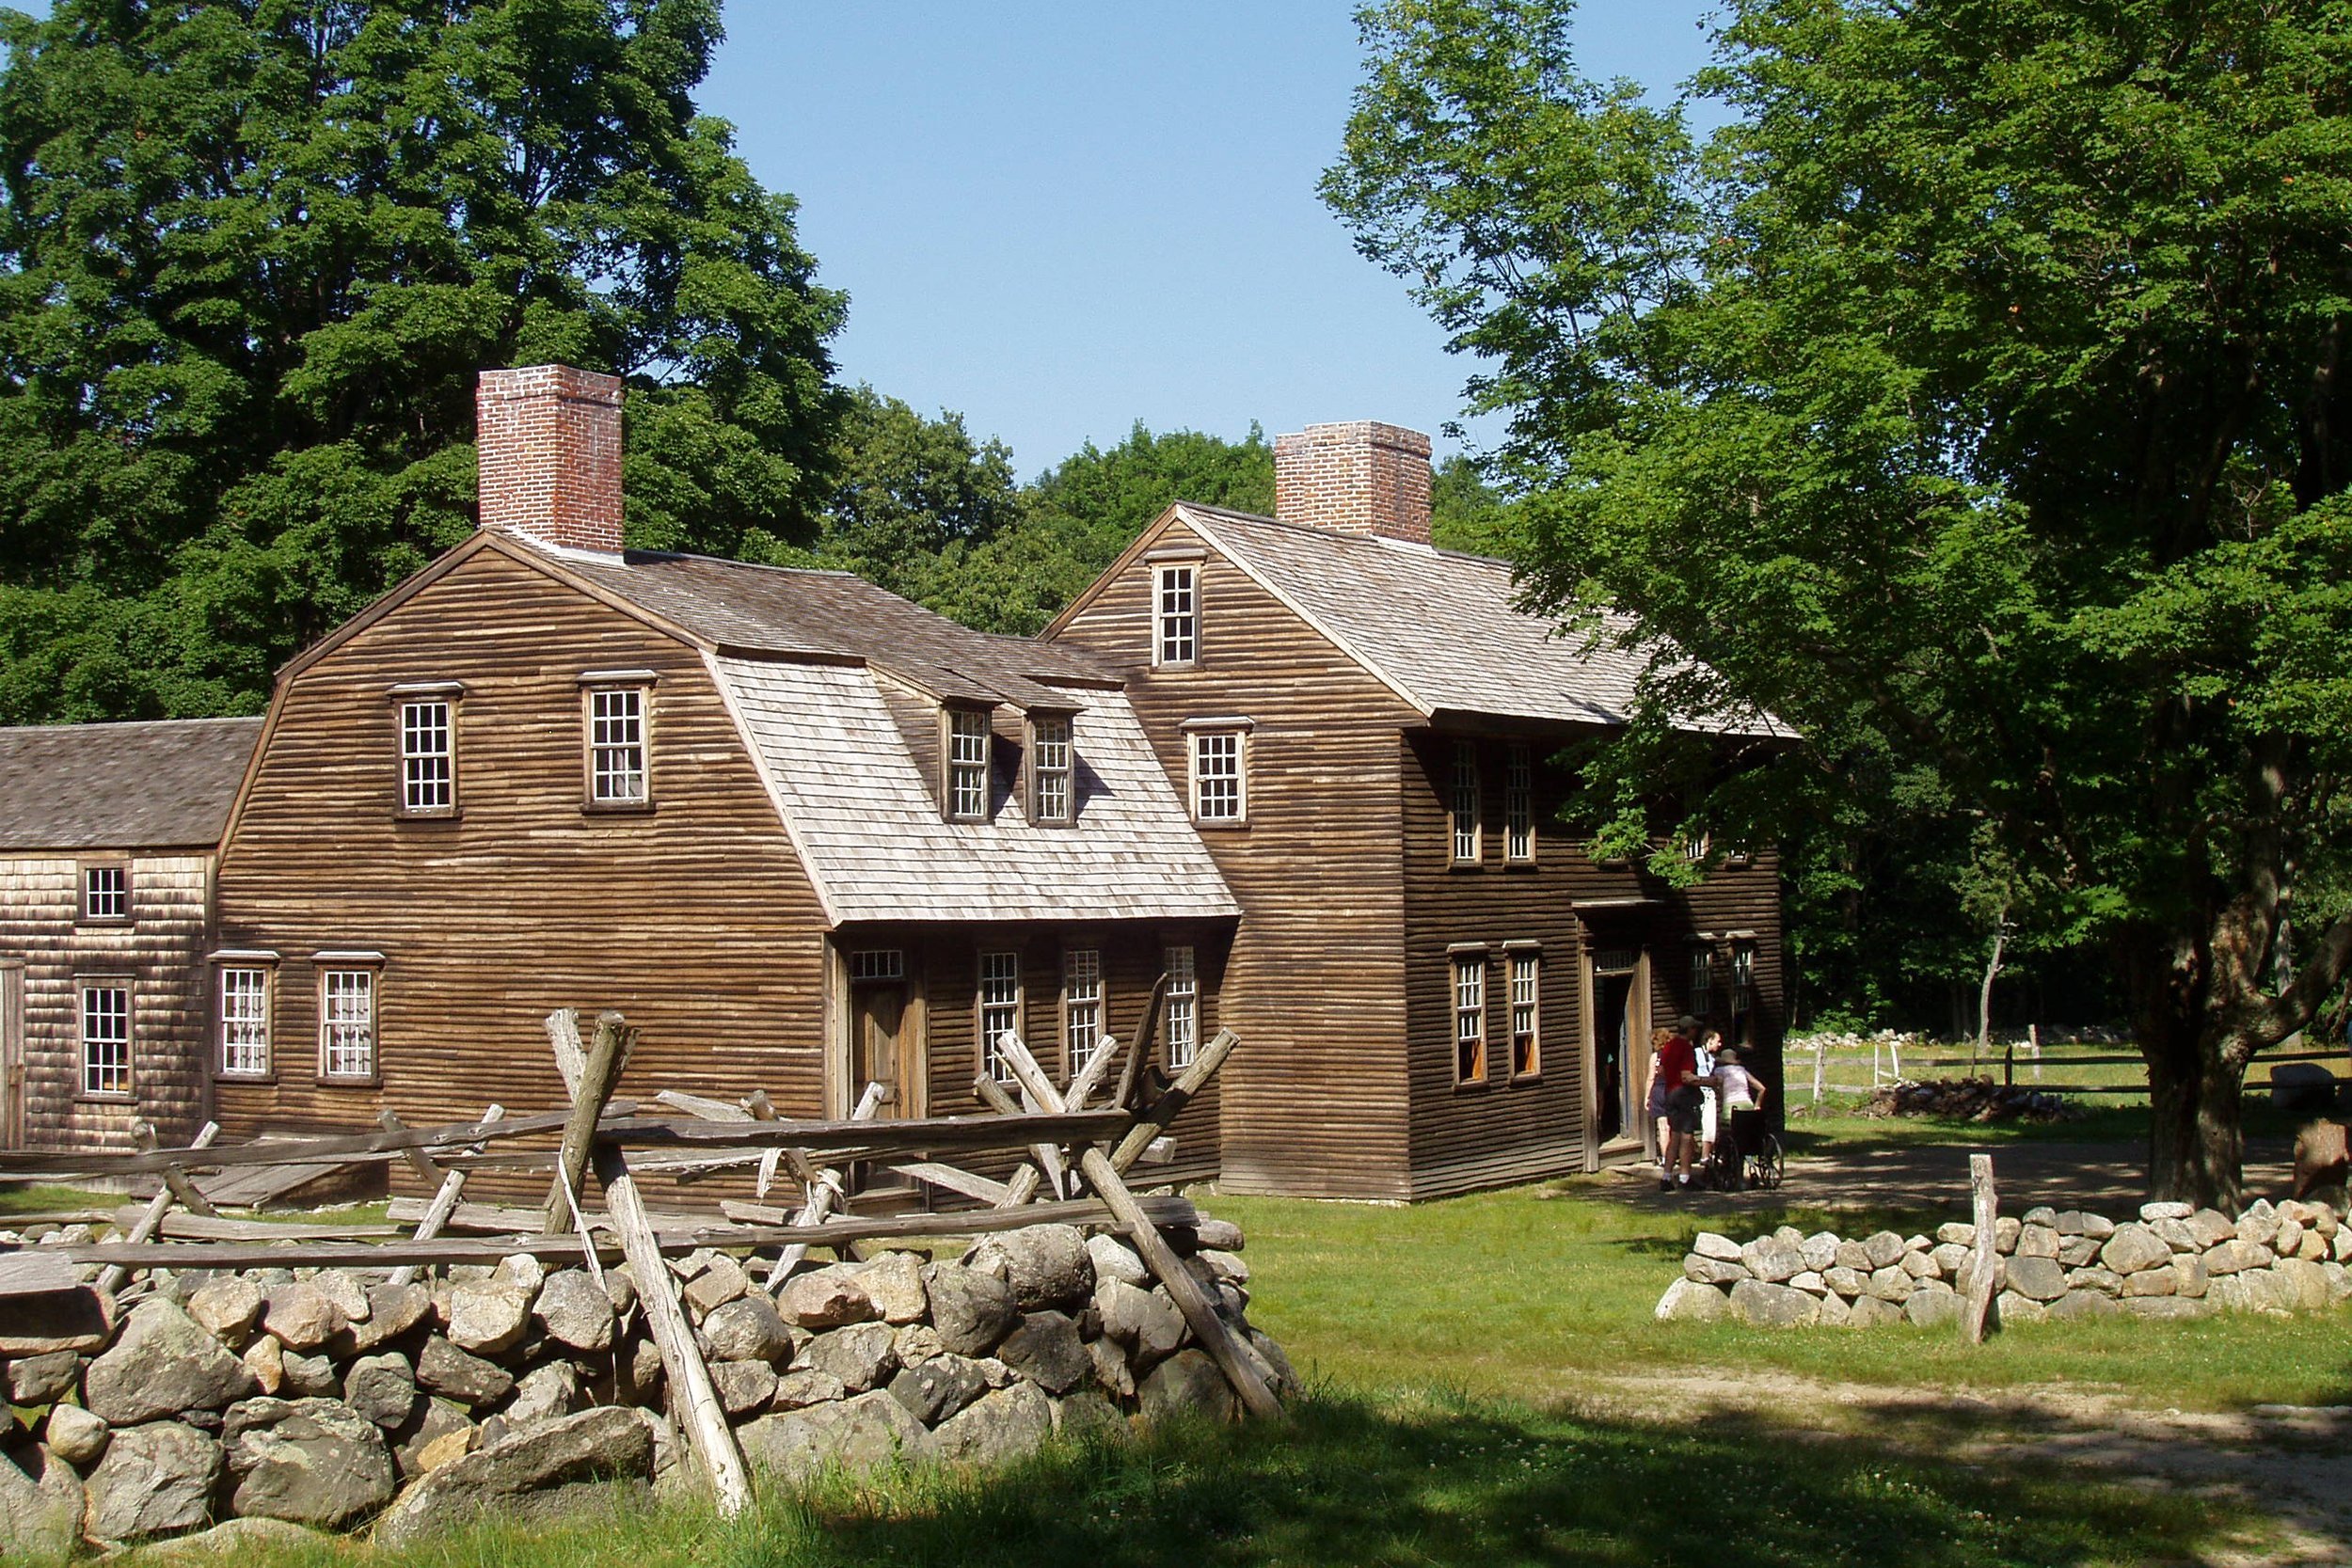 <p>The origins of the Revolutionary War are remembered at the <a href="https://www.nps.gov/mima/index.htm">Minute Man National Historical Park</a>. Here, visitors can explore battlefields, tour authentic homes and taverns, and watch a musket demonstration by costumed park rangers. Admission is free.</p><p><b>Related:</b> <a href="https://blog.cheapism.com/new-england-trivia/">Things You Didn't Know About New England</a></p>